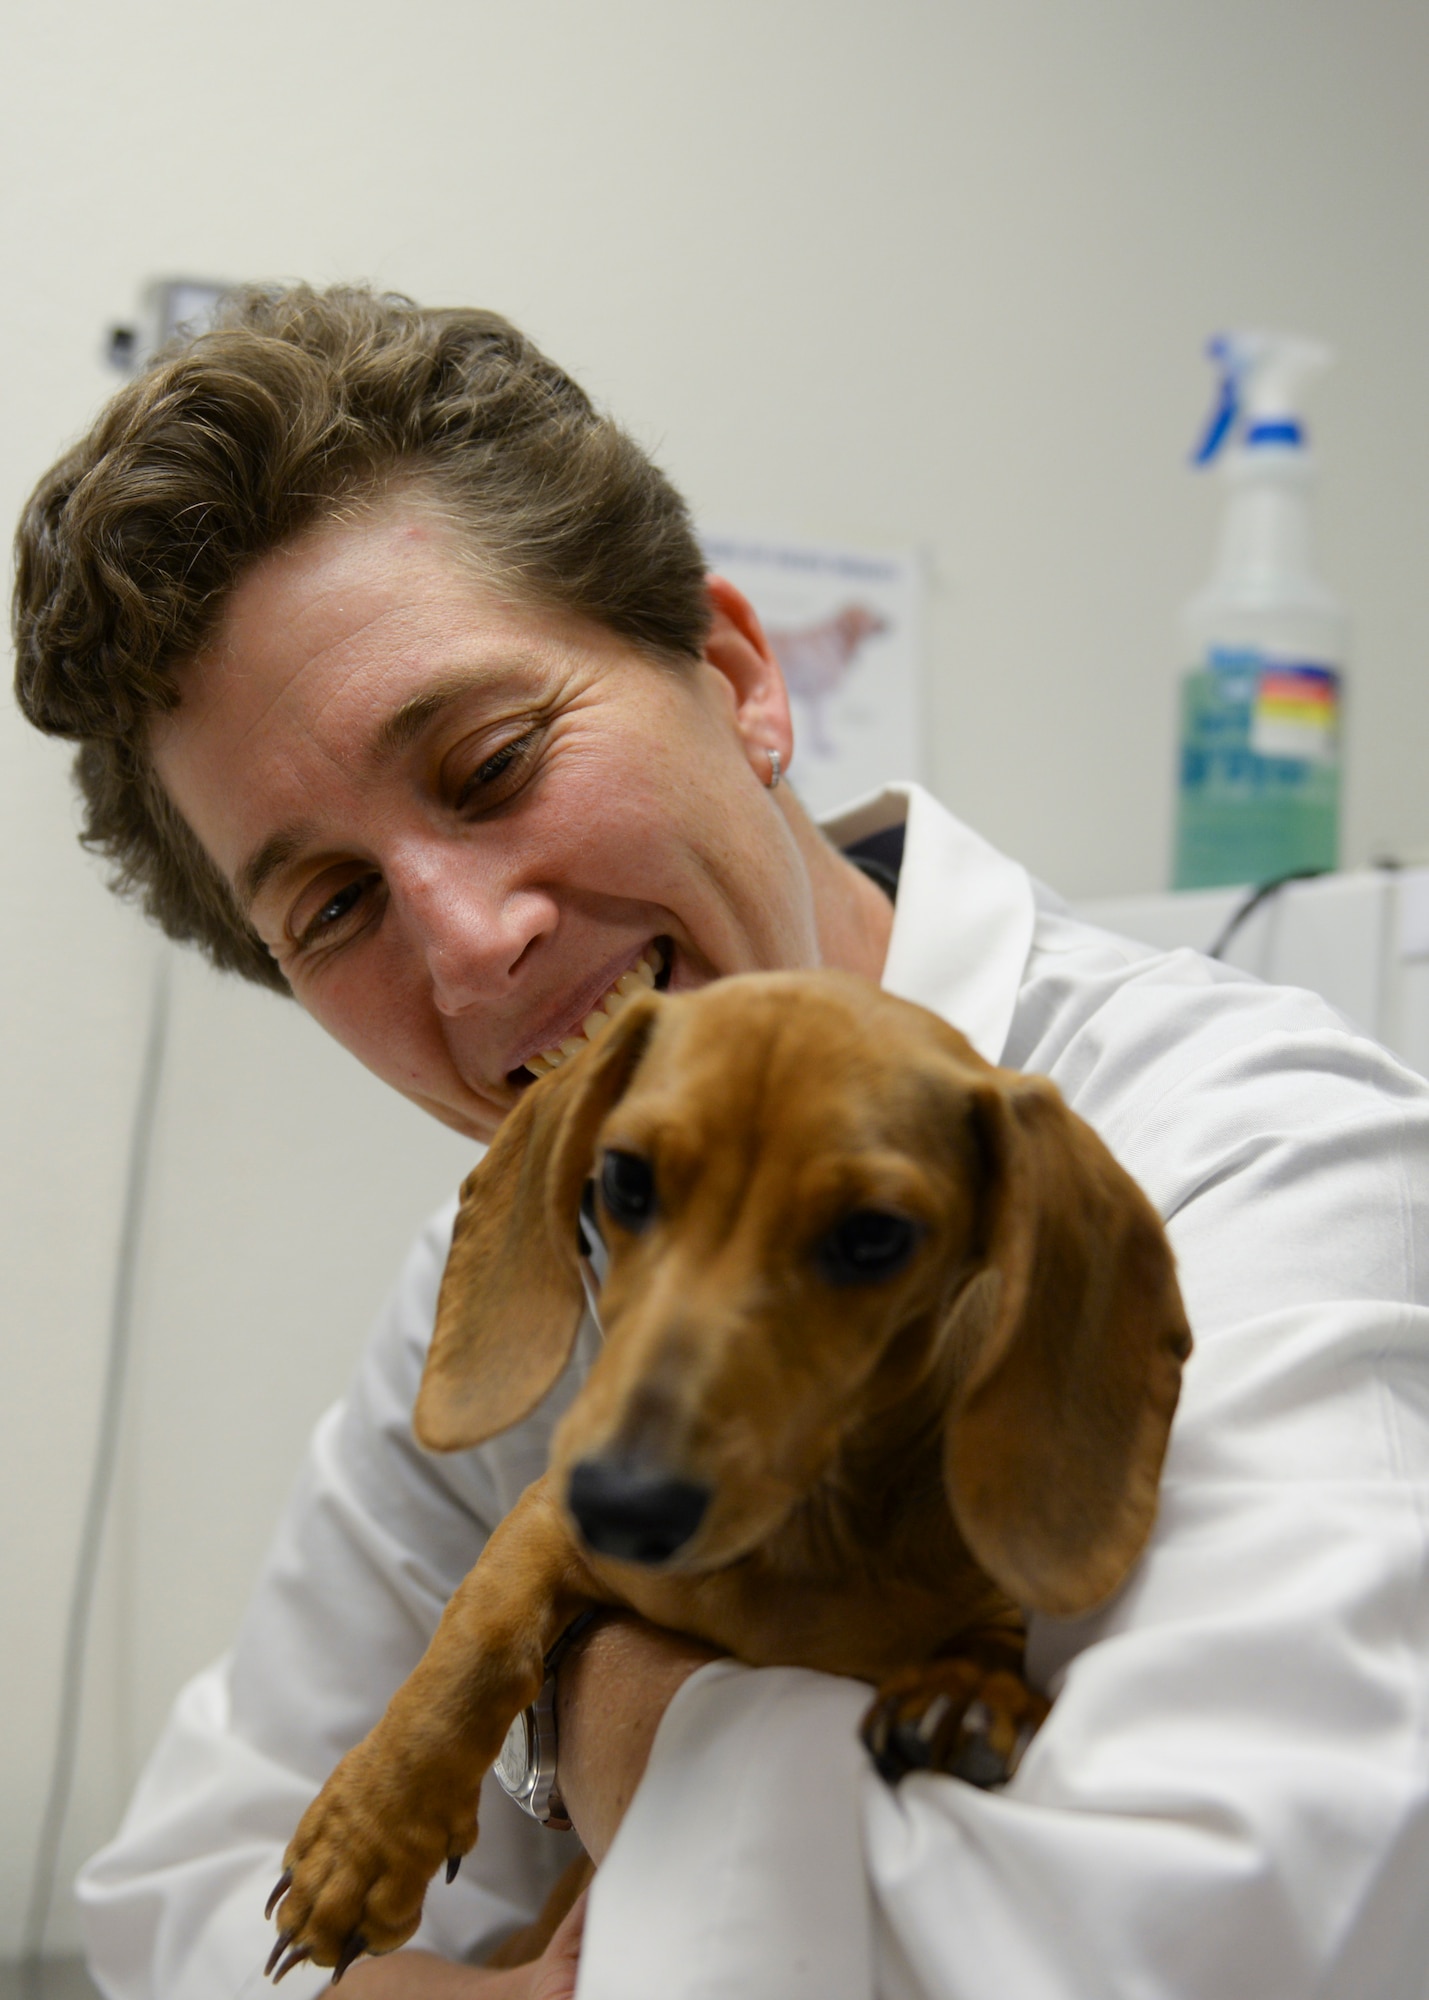 Capt. Katherine Lambden, officer in charge of the Holloman Veterinary Treatment Facility, holds Cash, a 5-month-old Dachshund, during a check-up at Holloman Air Force Base, N.M. Oct 1. Lambden graduated from Tuft University in Central Massachusetts. Lambden has a positive outlook on the future of the clinic. With an amazing staff and the wonderful clients and owners, Lambden feels like part of the Holloman community. (U.S. Air Force photo by Staff Sgt. E’Lysia A. Wray/Released)